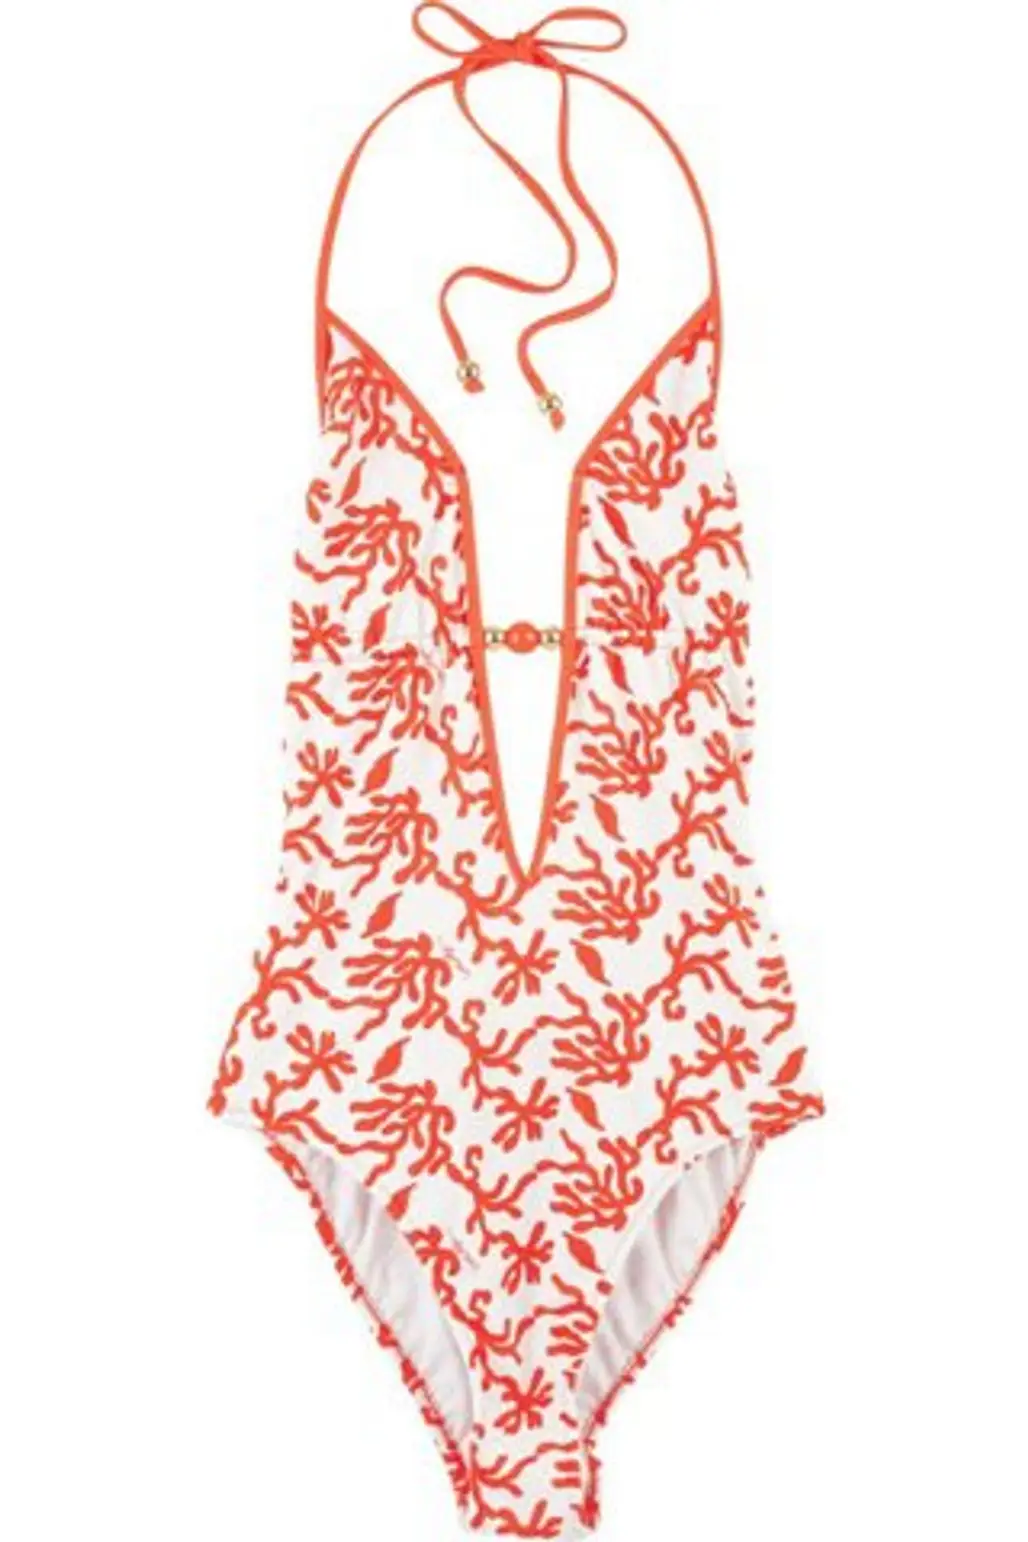 Milly Plunge Swimsuit ...